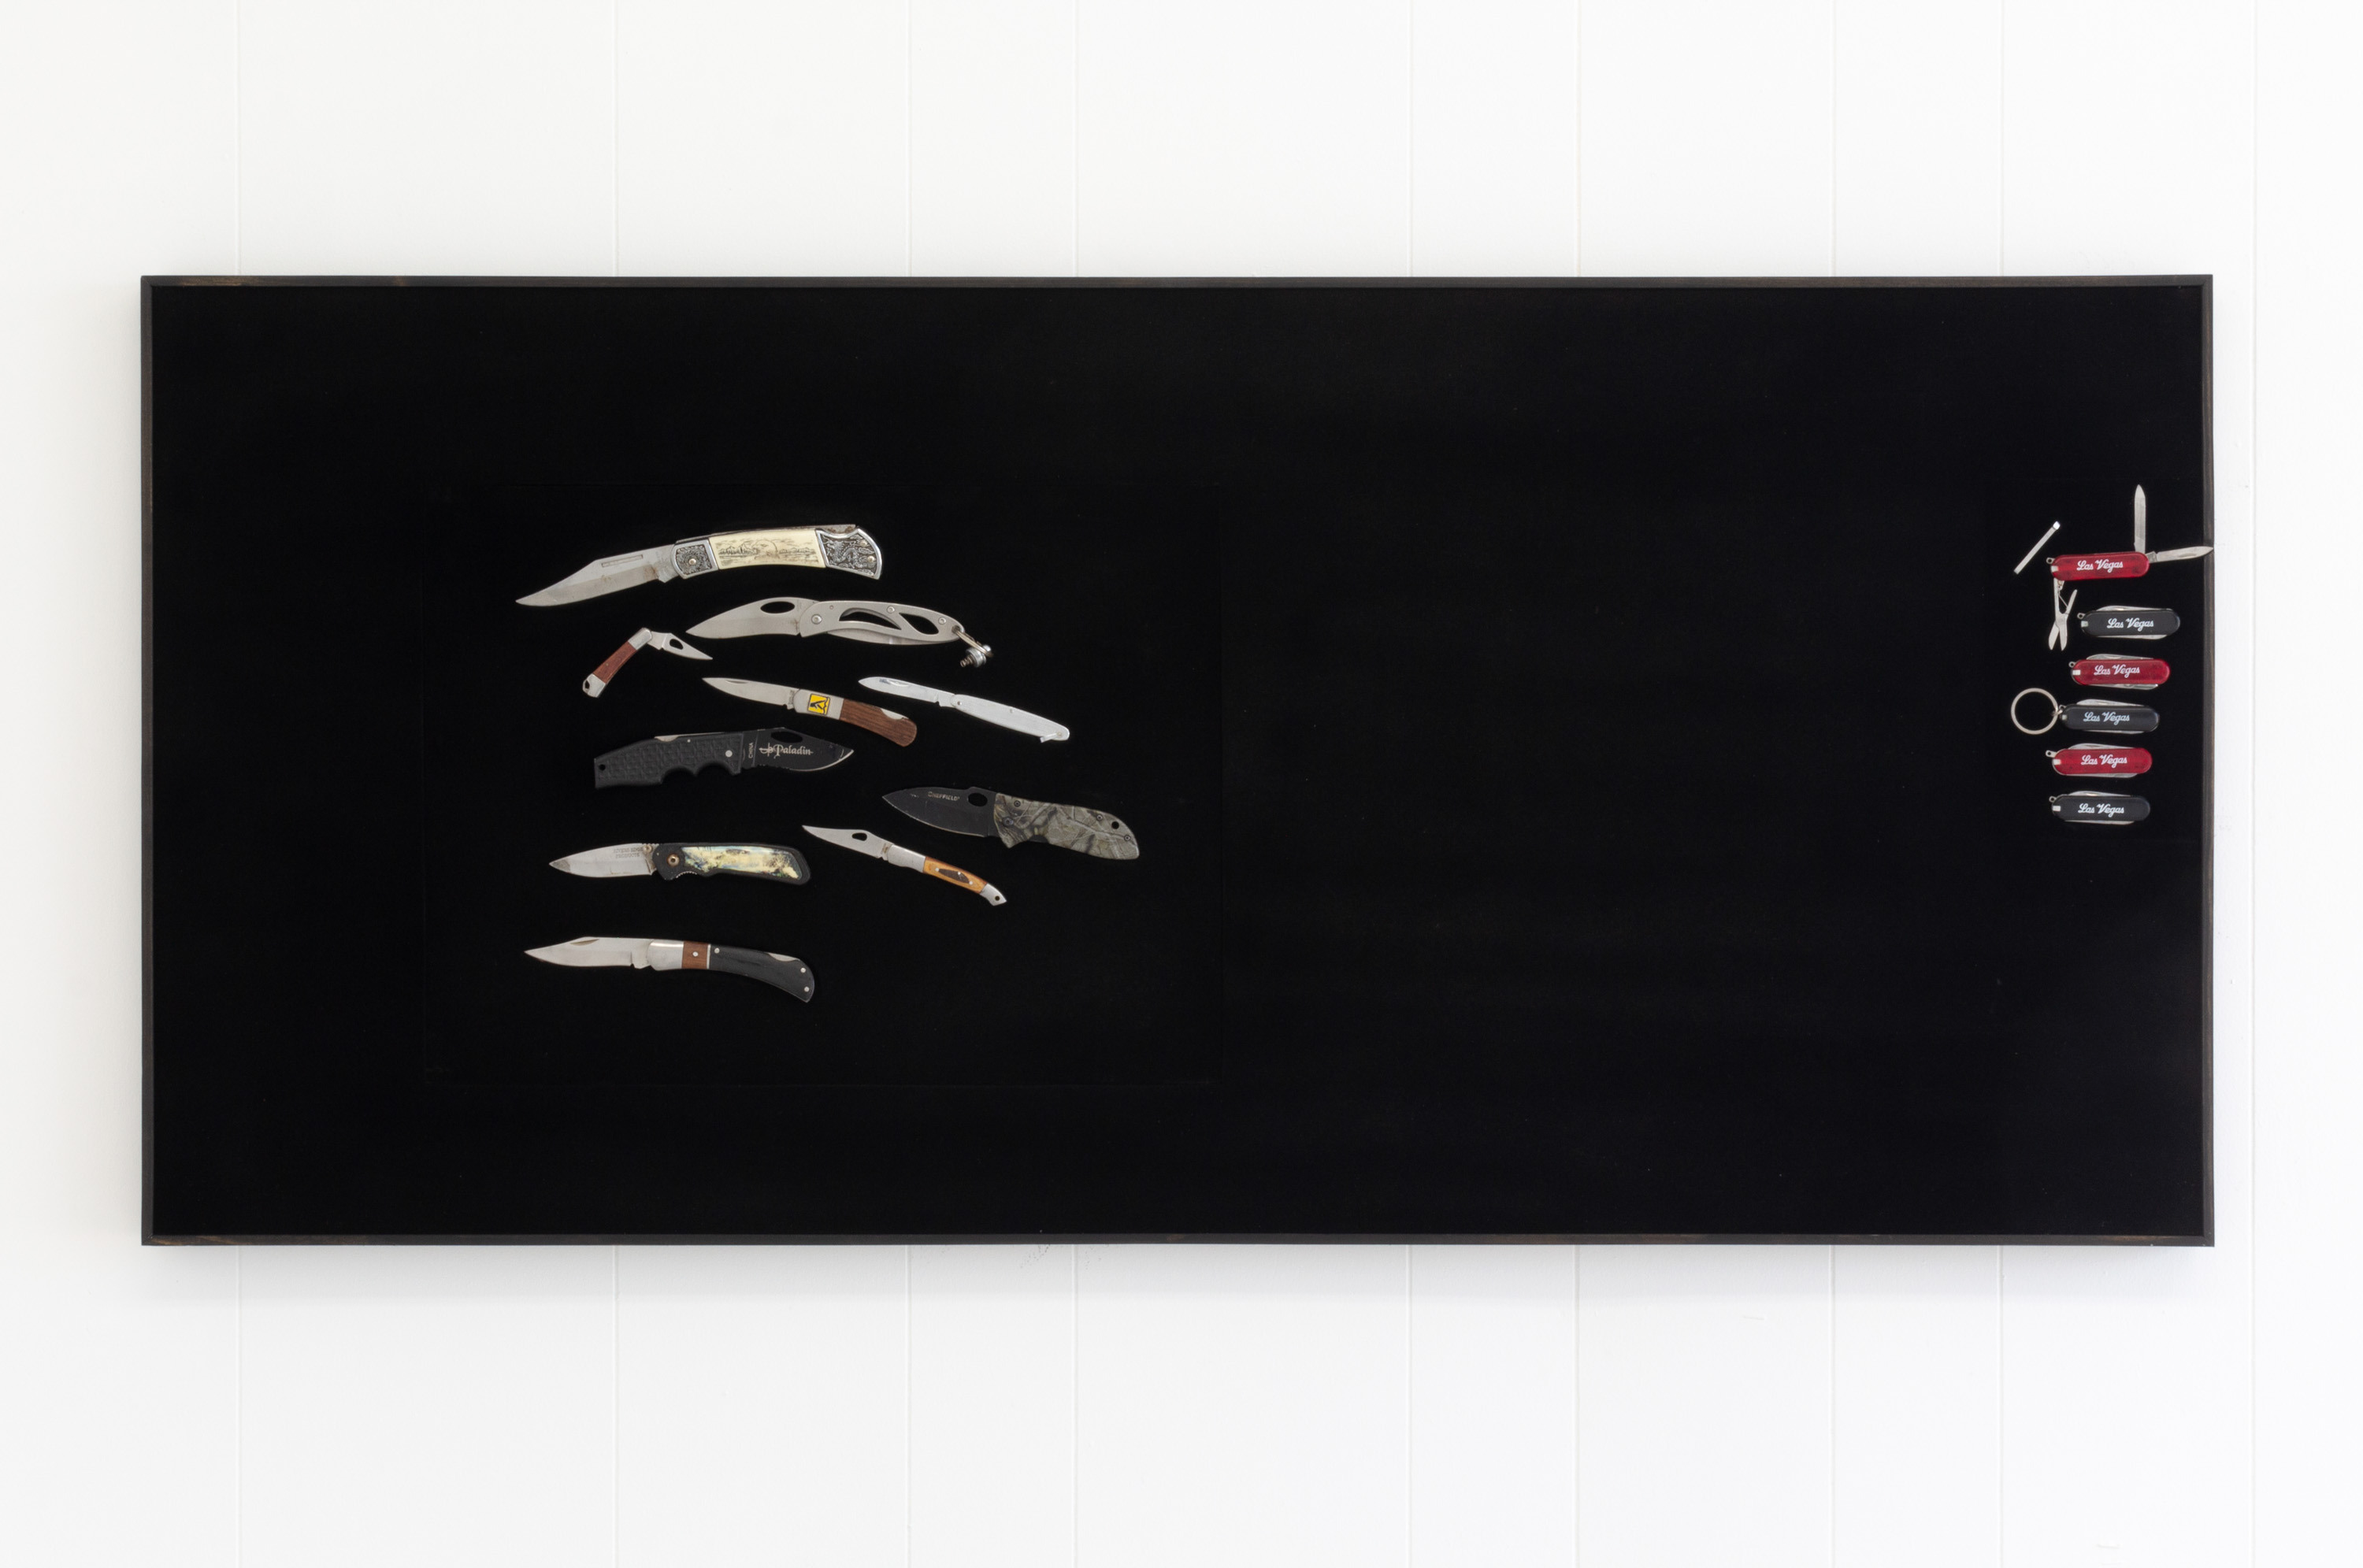 Jesse Robinson, 6 Black & RED Las Vegas Promo Multi Pocket Survival Knife KeyRing TSA and 10 ASSORTED KNIVES FISHING AIRPORT CONFISCATION LOT 629H, 2018, Confiscated knives, wood, epoxy putty, microfiber, and magnets, 48 x 24 x 1.5 in